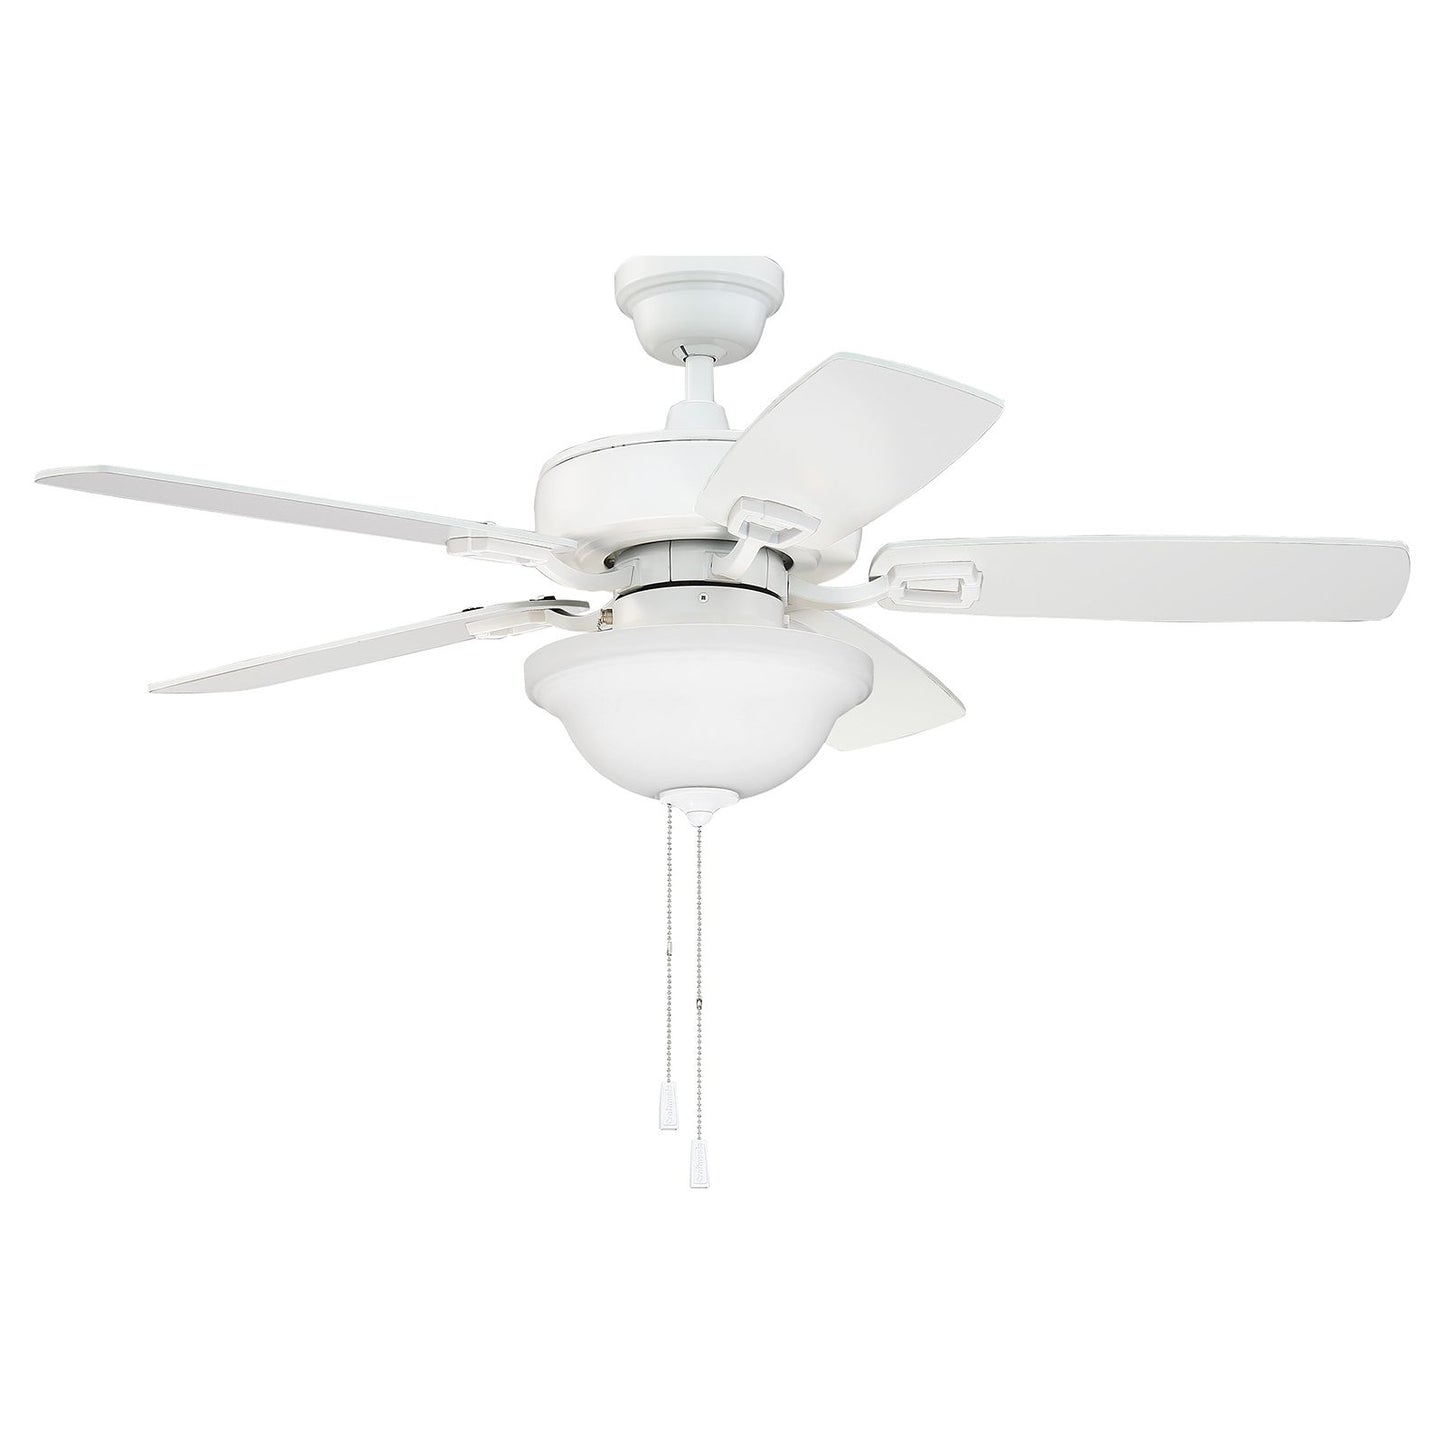 TCE42W5C1 - Twist N Click 42" 5 Blade Ceiling Fan with Light Kit - Pull Chain - White